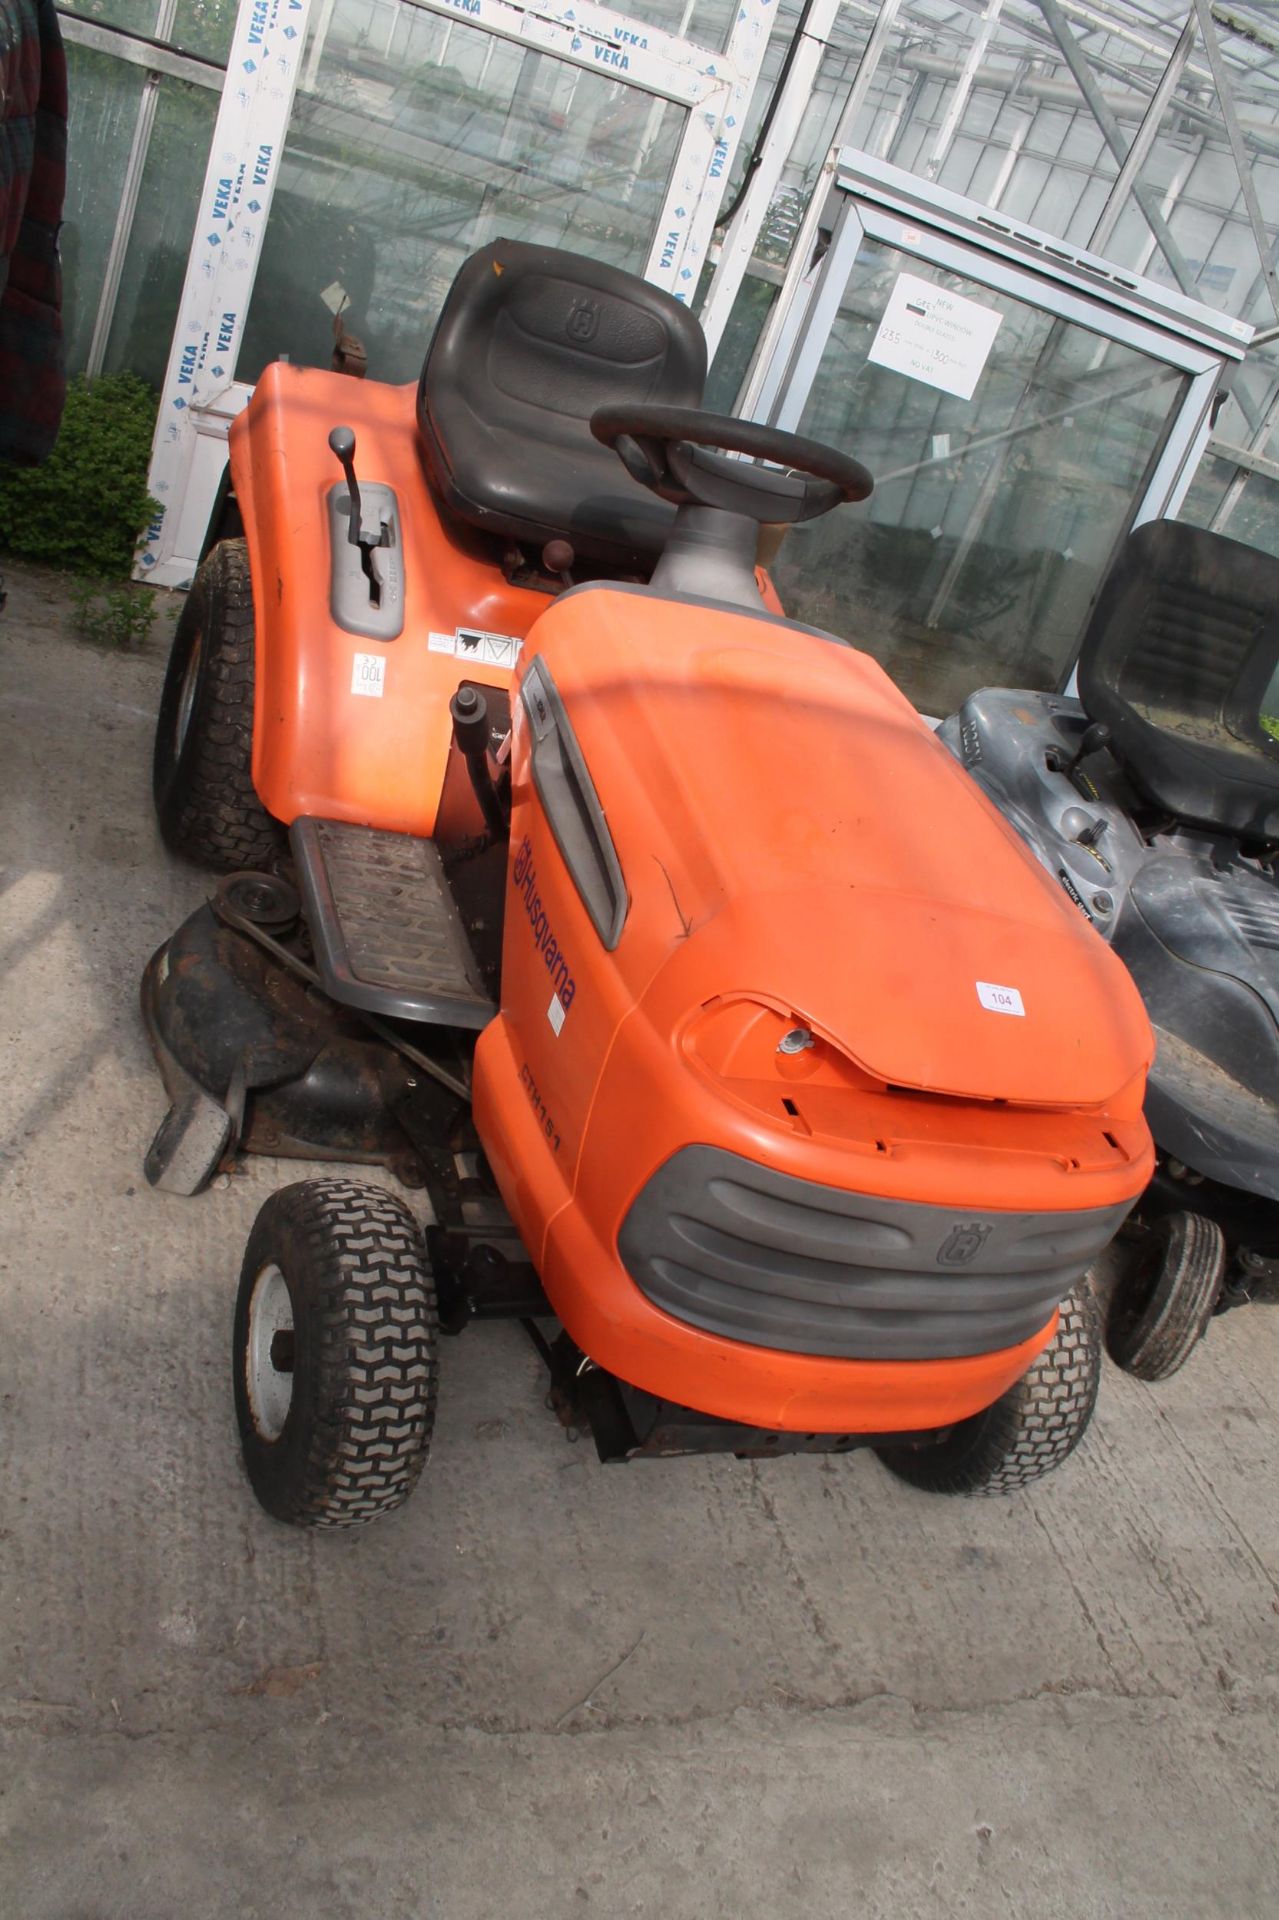 A HUSQVARNA CTH151 RIDE ON LAWNMOWER COMPLETE WITH GRASS BOX, KEY AND KOHLER COURAGE 15 ENGINE NO